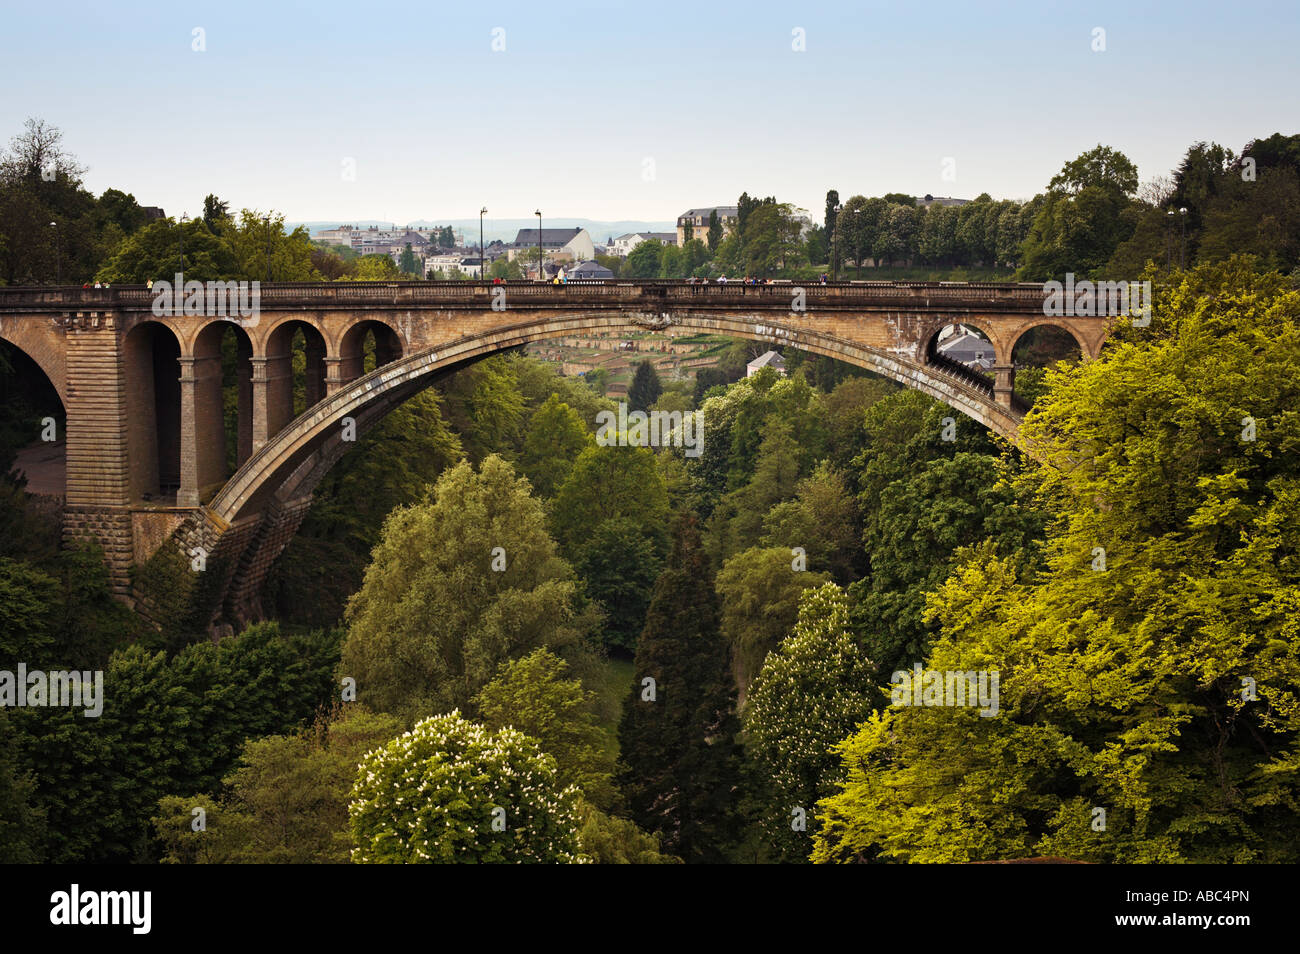 Adolphe Bridge across the Petrusse Valley in Luxembourg City Luxembourg Europe Stock Photo